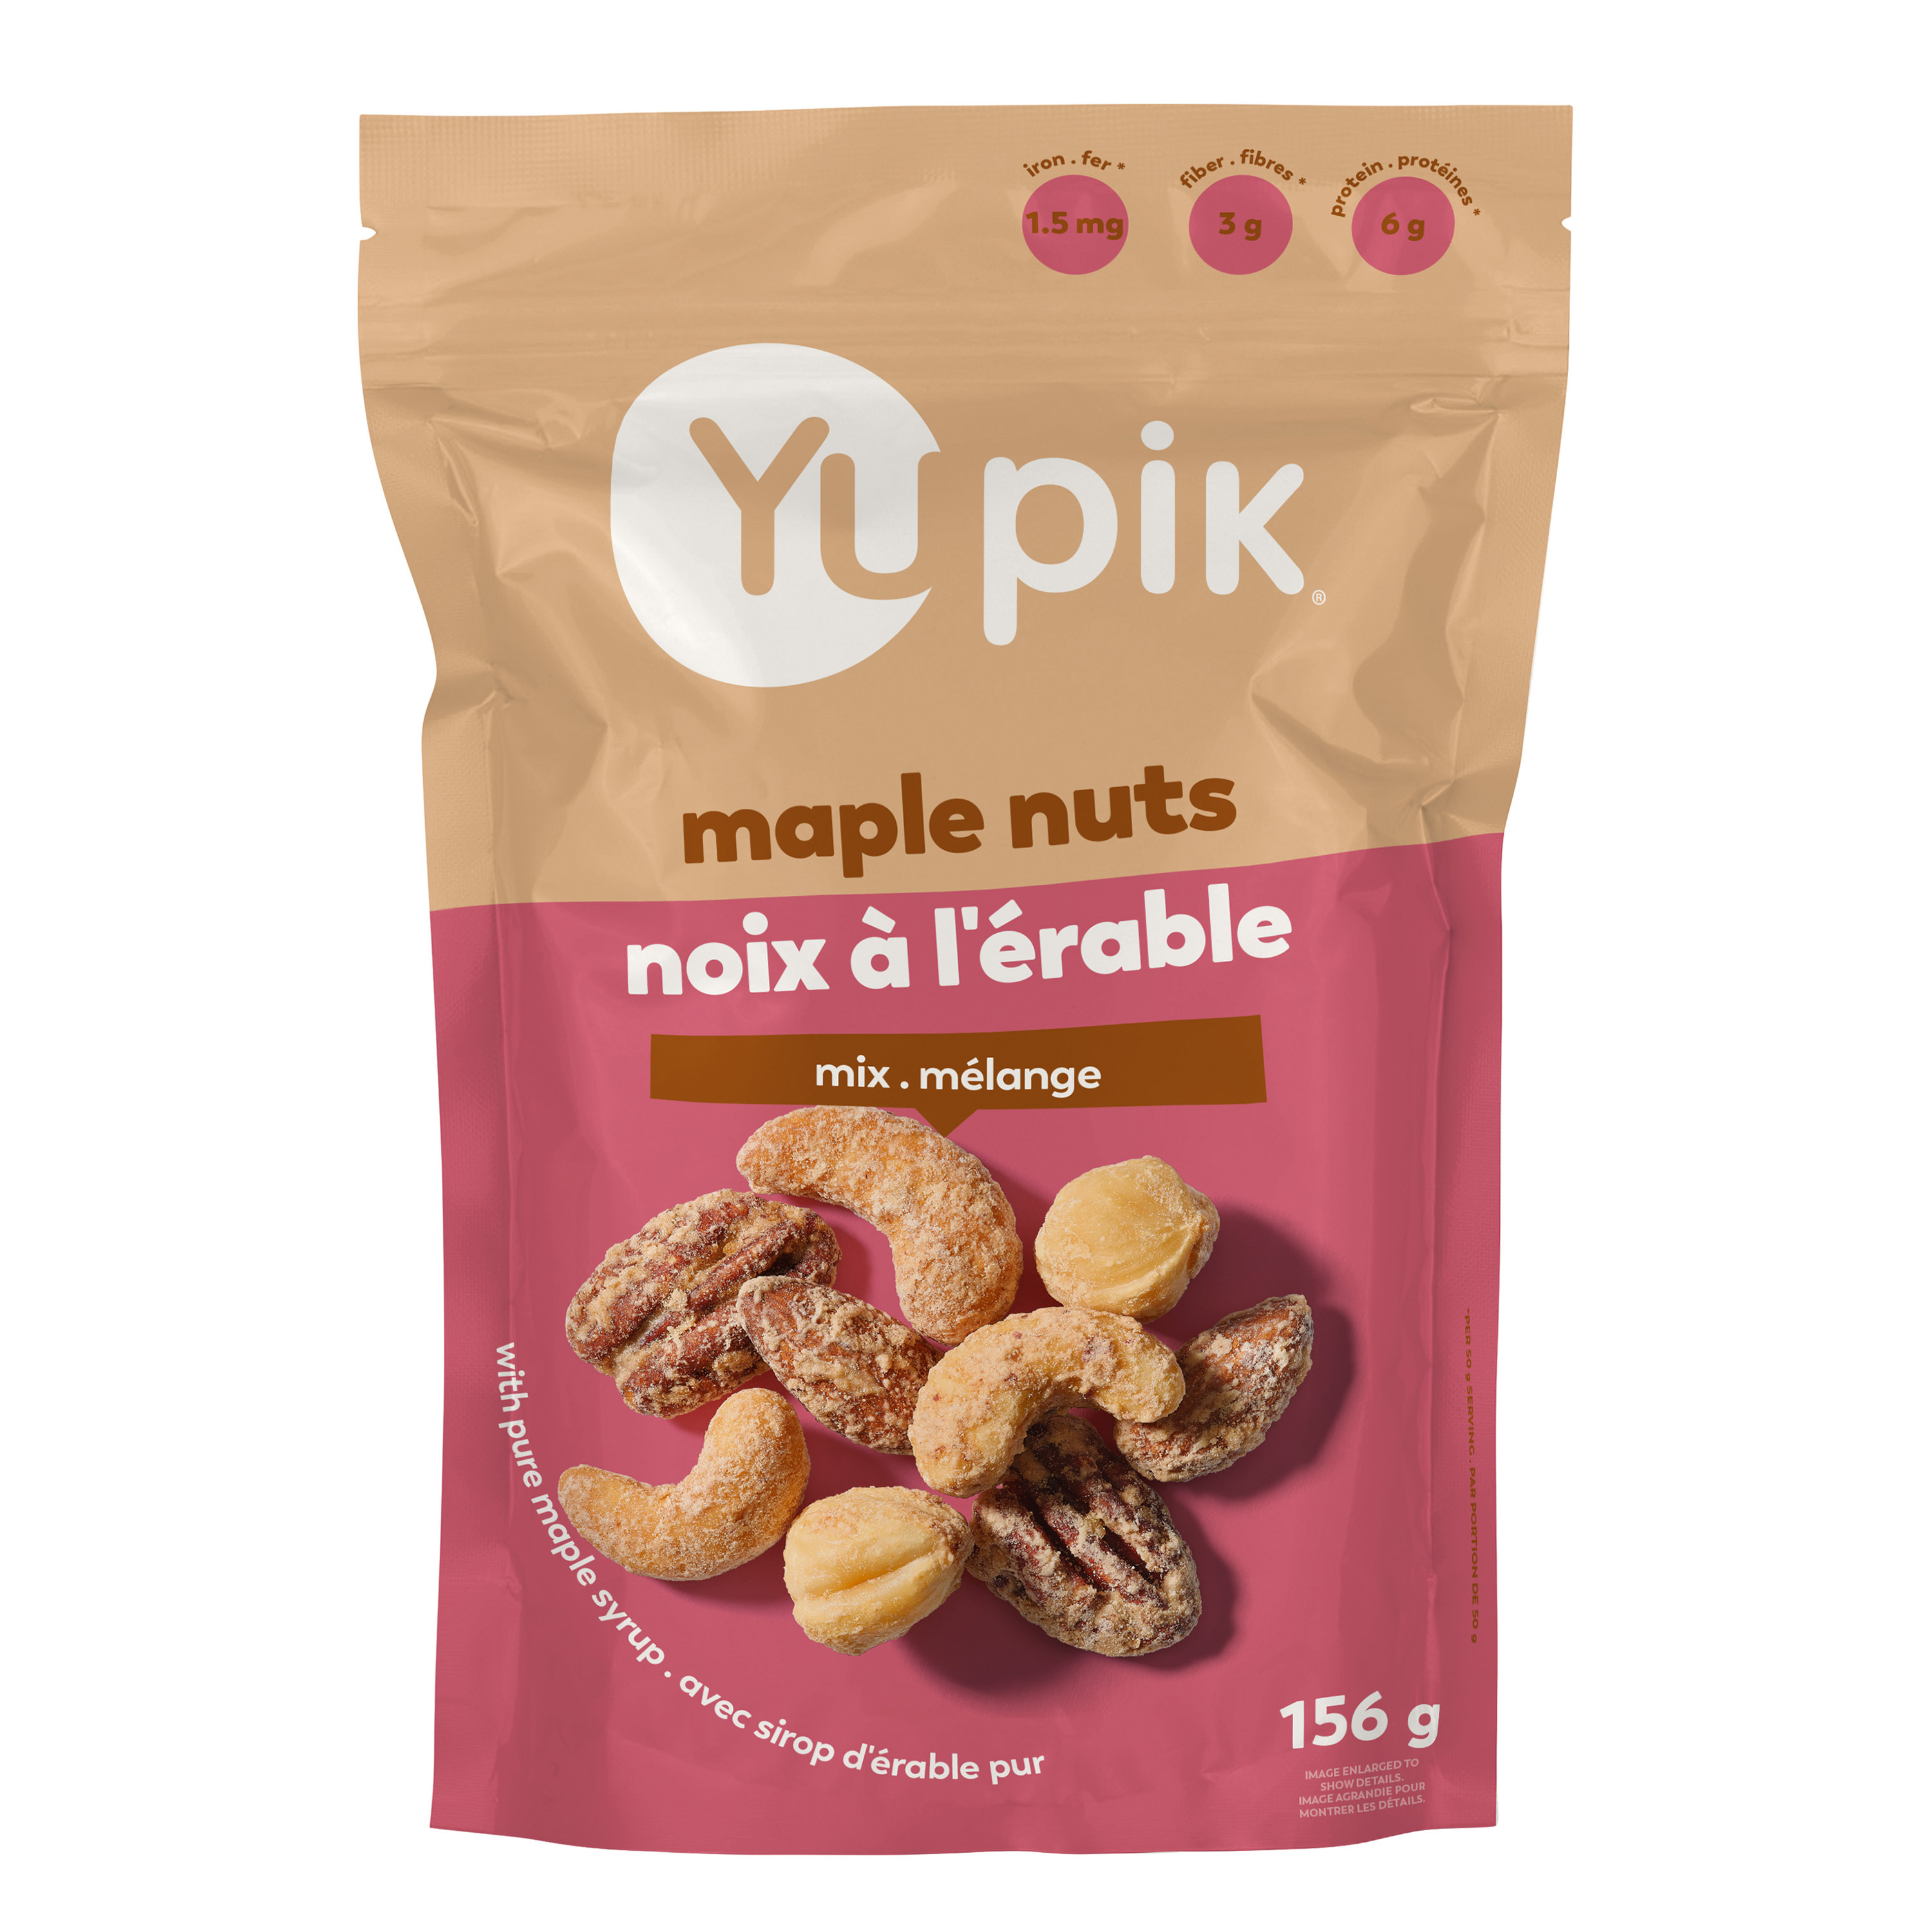 Dry roasted almonds, Dry roasted cashews, Organic cane sugar, Dry roasted pecans, Blanched filberts, Maple syrup, Maple flavor (propylene glycol, natural flavor), Cinnamon powder, Sea salt

This product may occasionally contain shell pieces